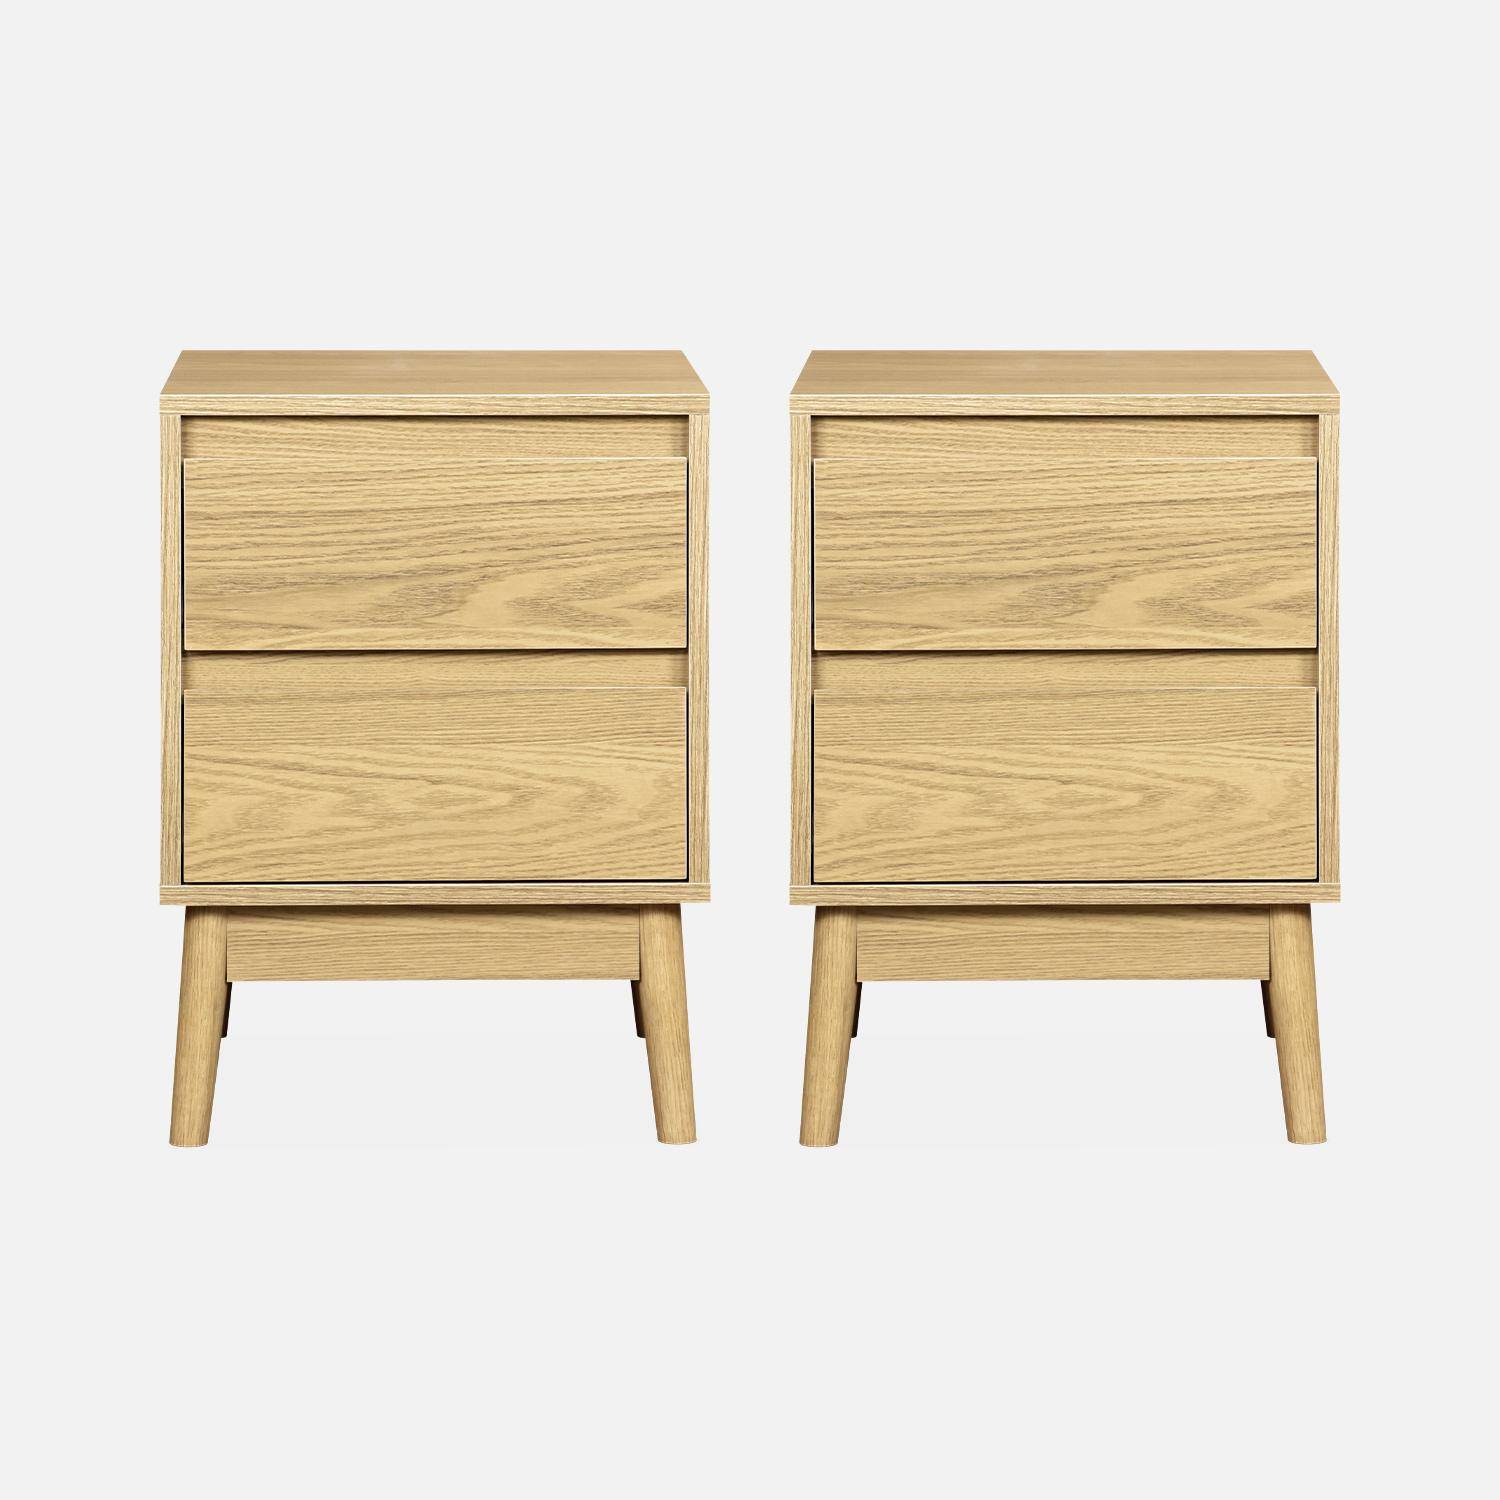 Pair of bedside tables with 2 drawers, 26x40x56cm - Dune - Natural Photo4